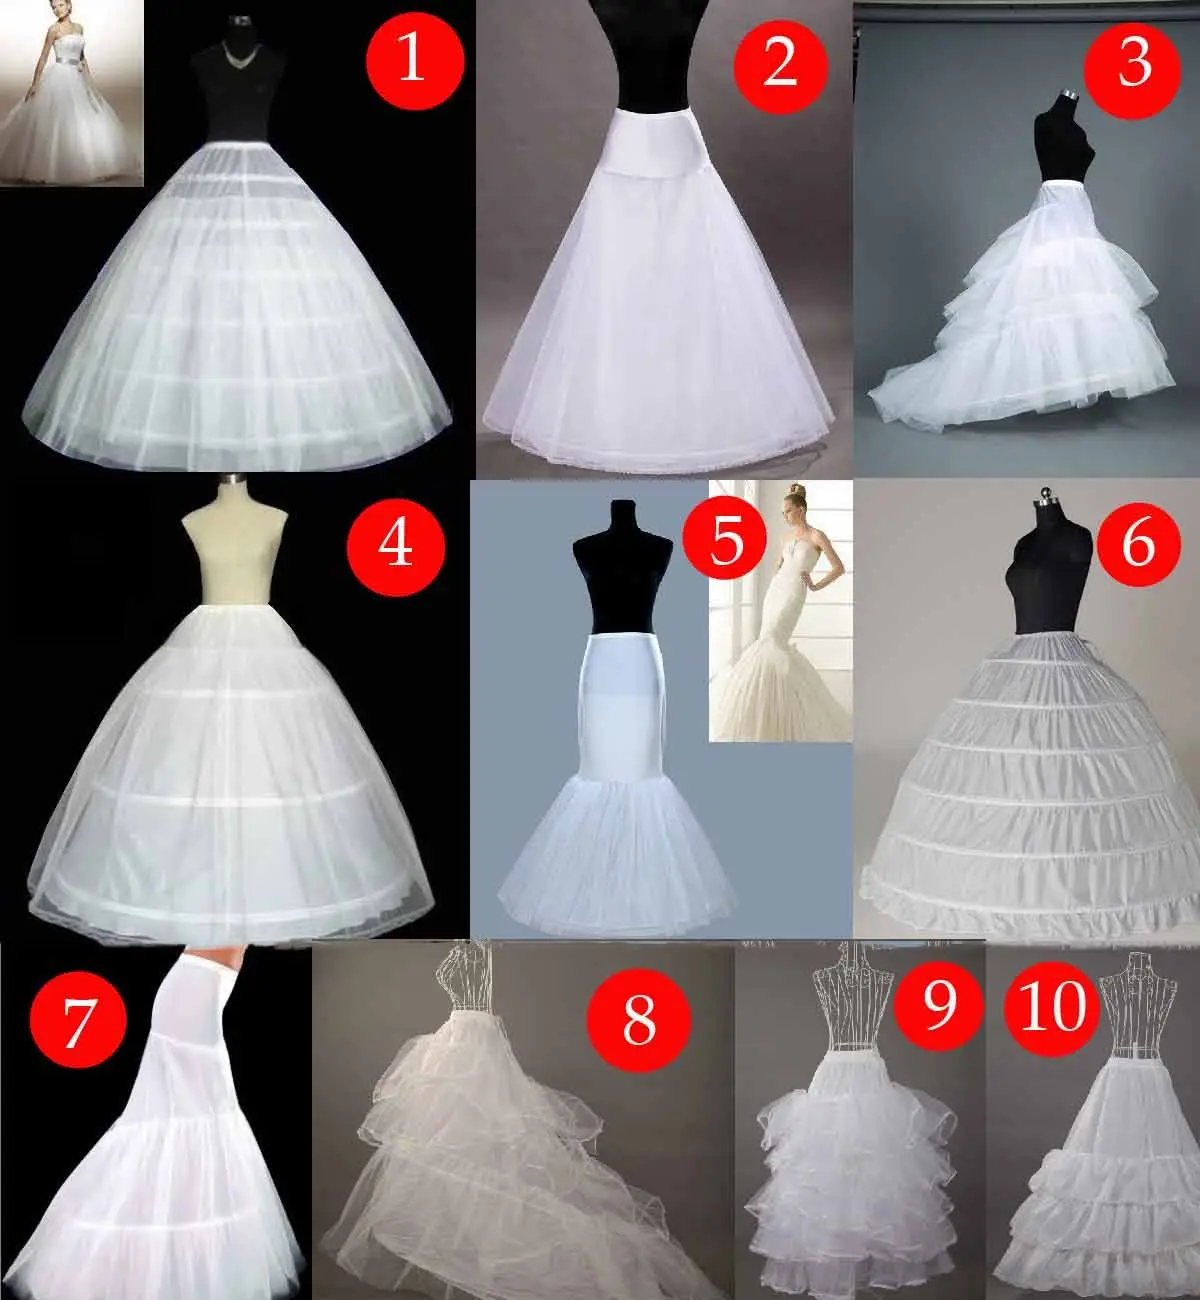 Cheap Bridal Petticoat Wedding Dresses Underskirt For Women Formal Gowns Hot Sale Mermaid / Ball Gown Free Shipping